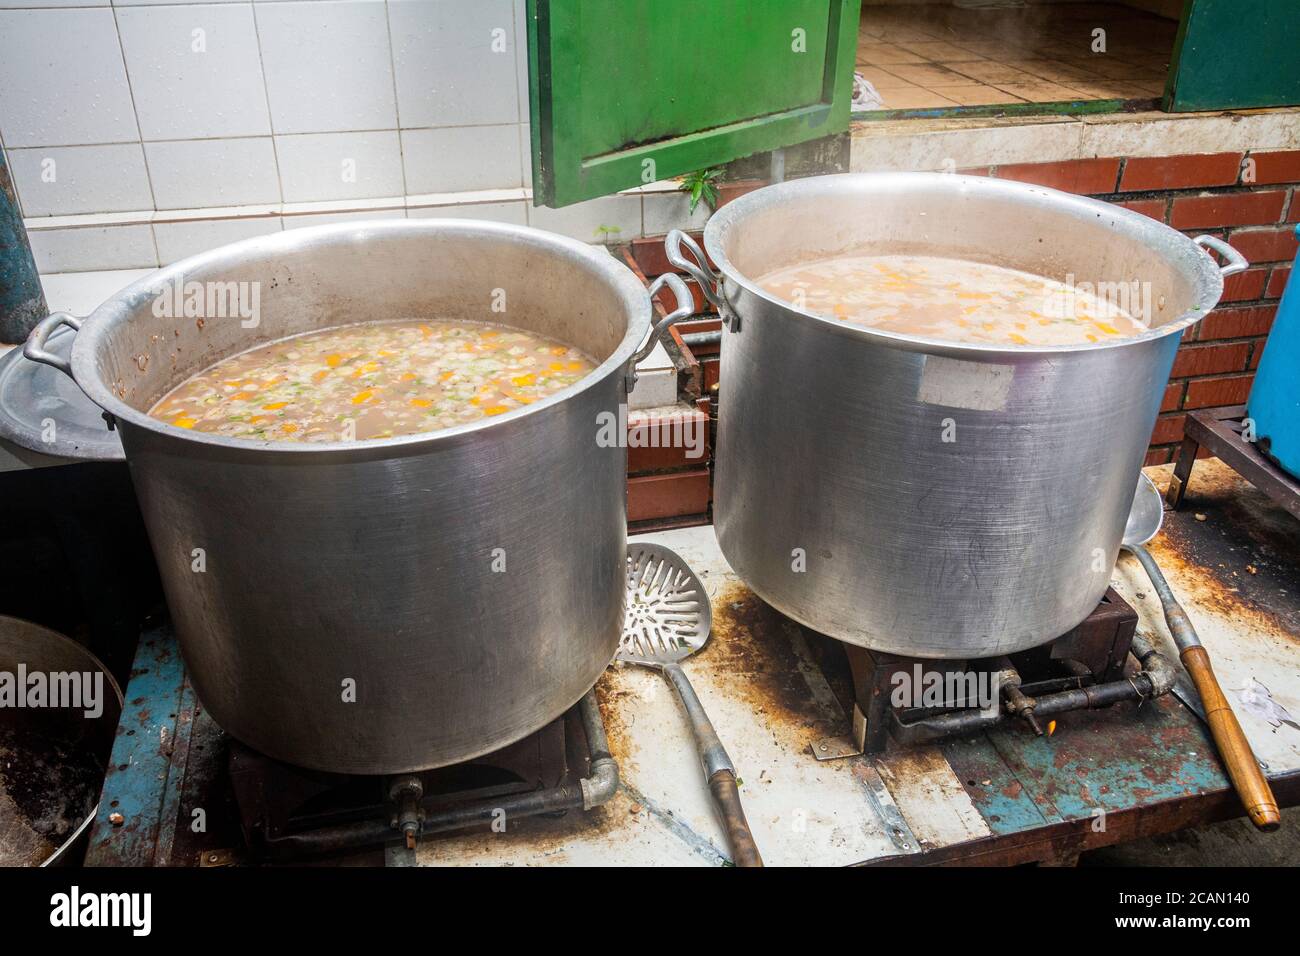 https://c8.alamy.com/comp/2CAN140/a-big-soup-made-of-rice-grains-and-meat-is-served-every-friday-in-the-parish-maria-auxiliadora-of-boleita-caracas-venezuela-through-the-program-2CAN140.jpg